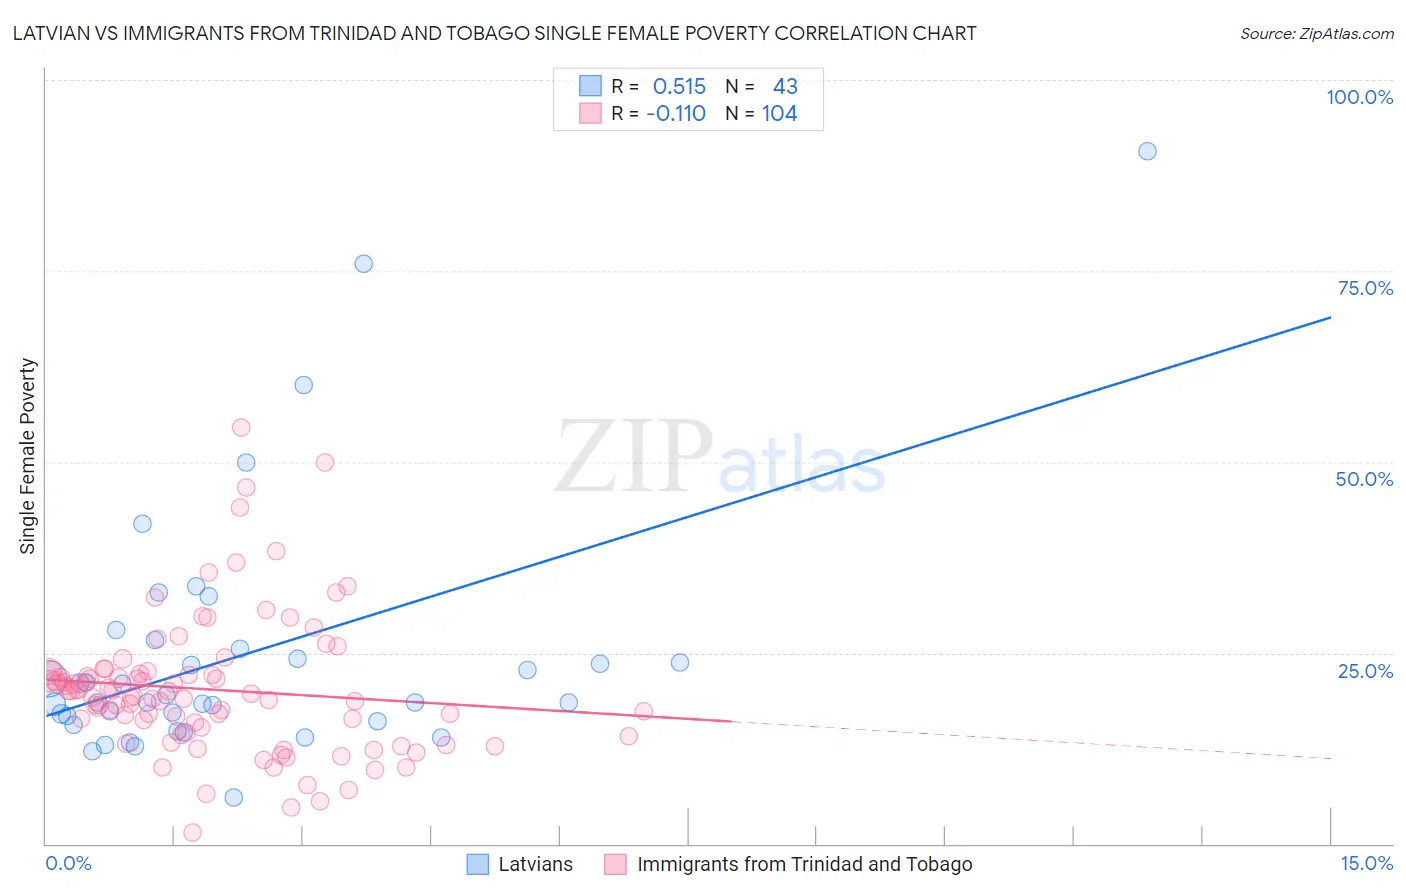 Latvian vs Immigrants from Trinidad and Tobago Single Female Poverty